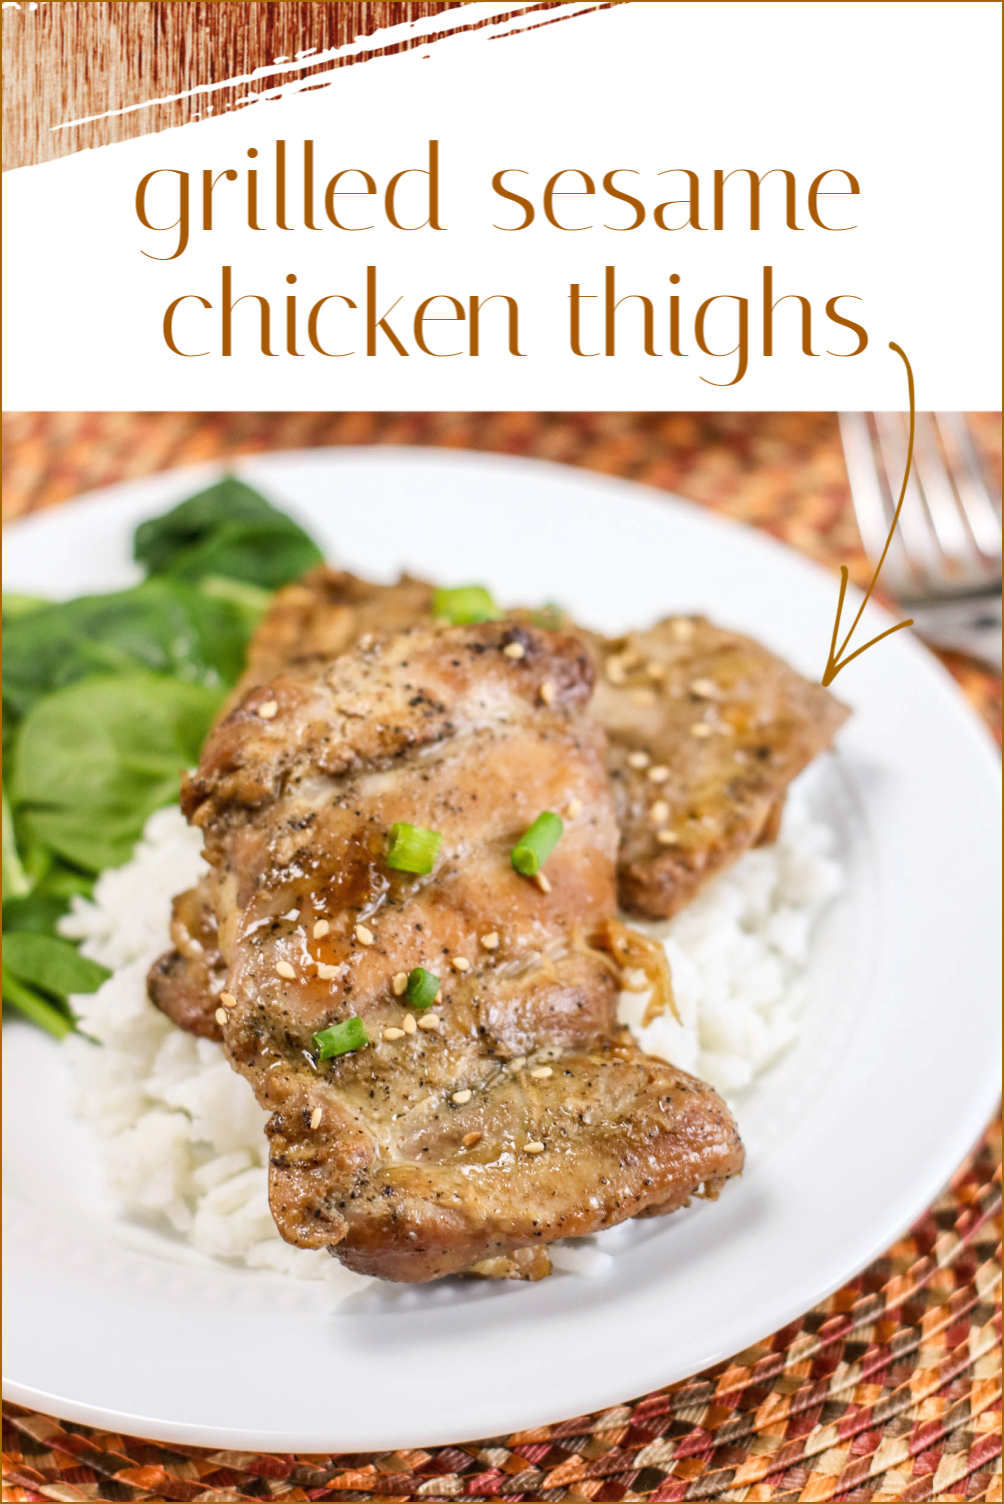 Tender and moist chicken thighs are soaked in a savory-sweet marinade then grilled for a simple yet flavorful dinner in this Grilled Sesame Chicken Thighs recipe. A quick and easy recipe that the whole family will love. #recipes #grilledrecipes #chicken #sesamechicken